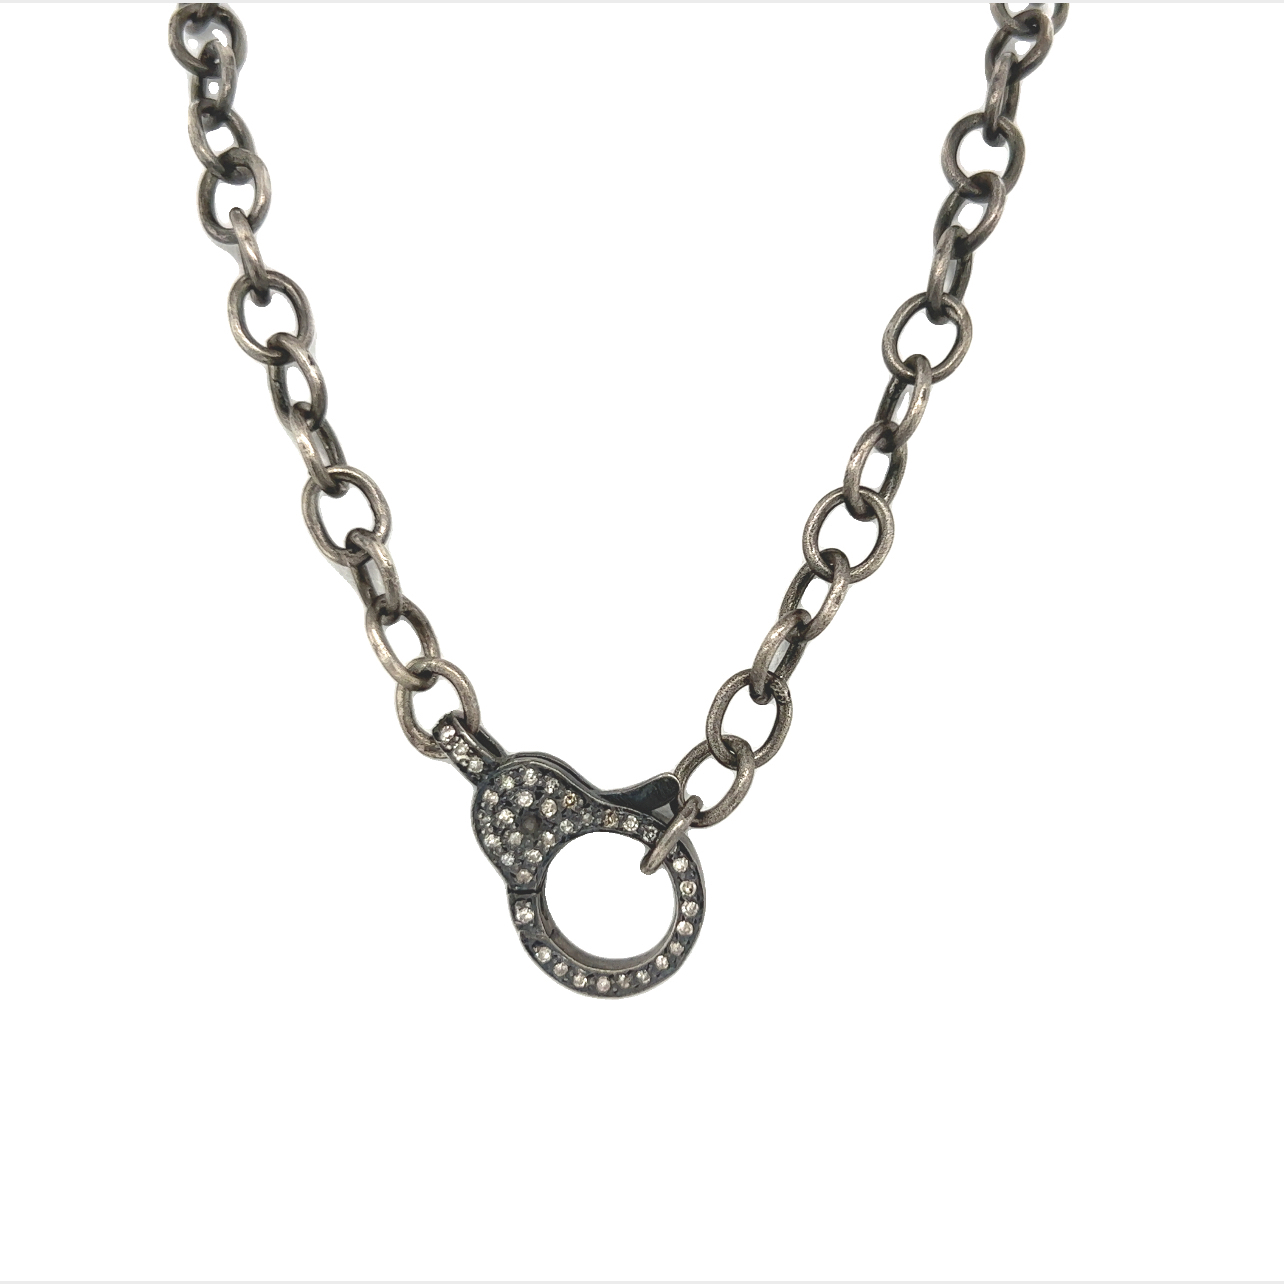 Featured image for “34 inch Oxidized Chain with Medium Clasp”